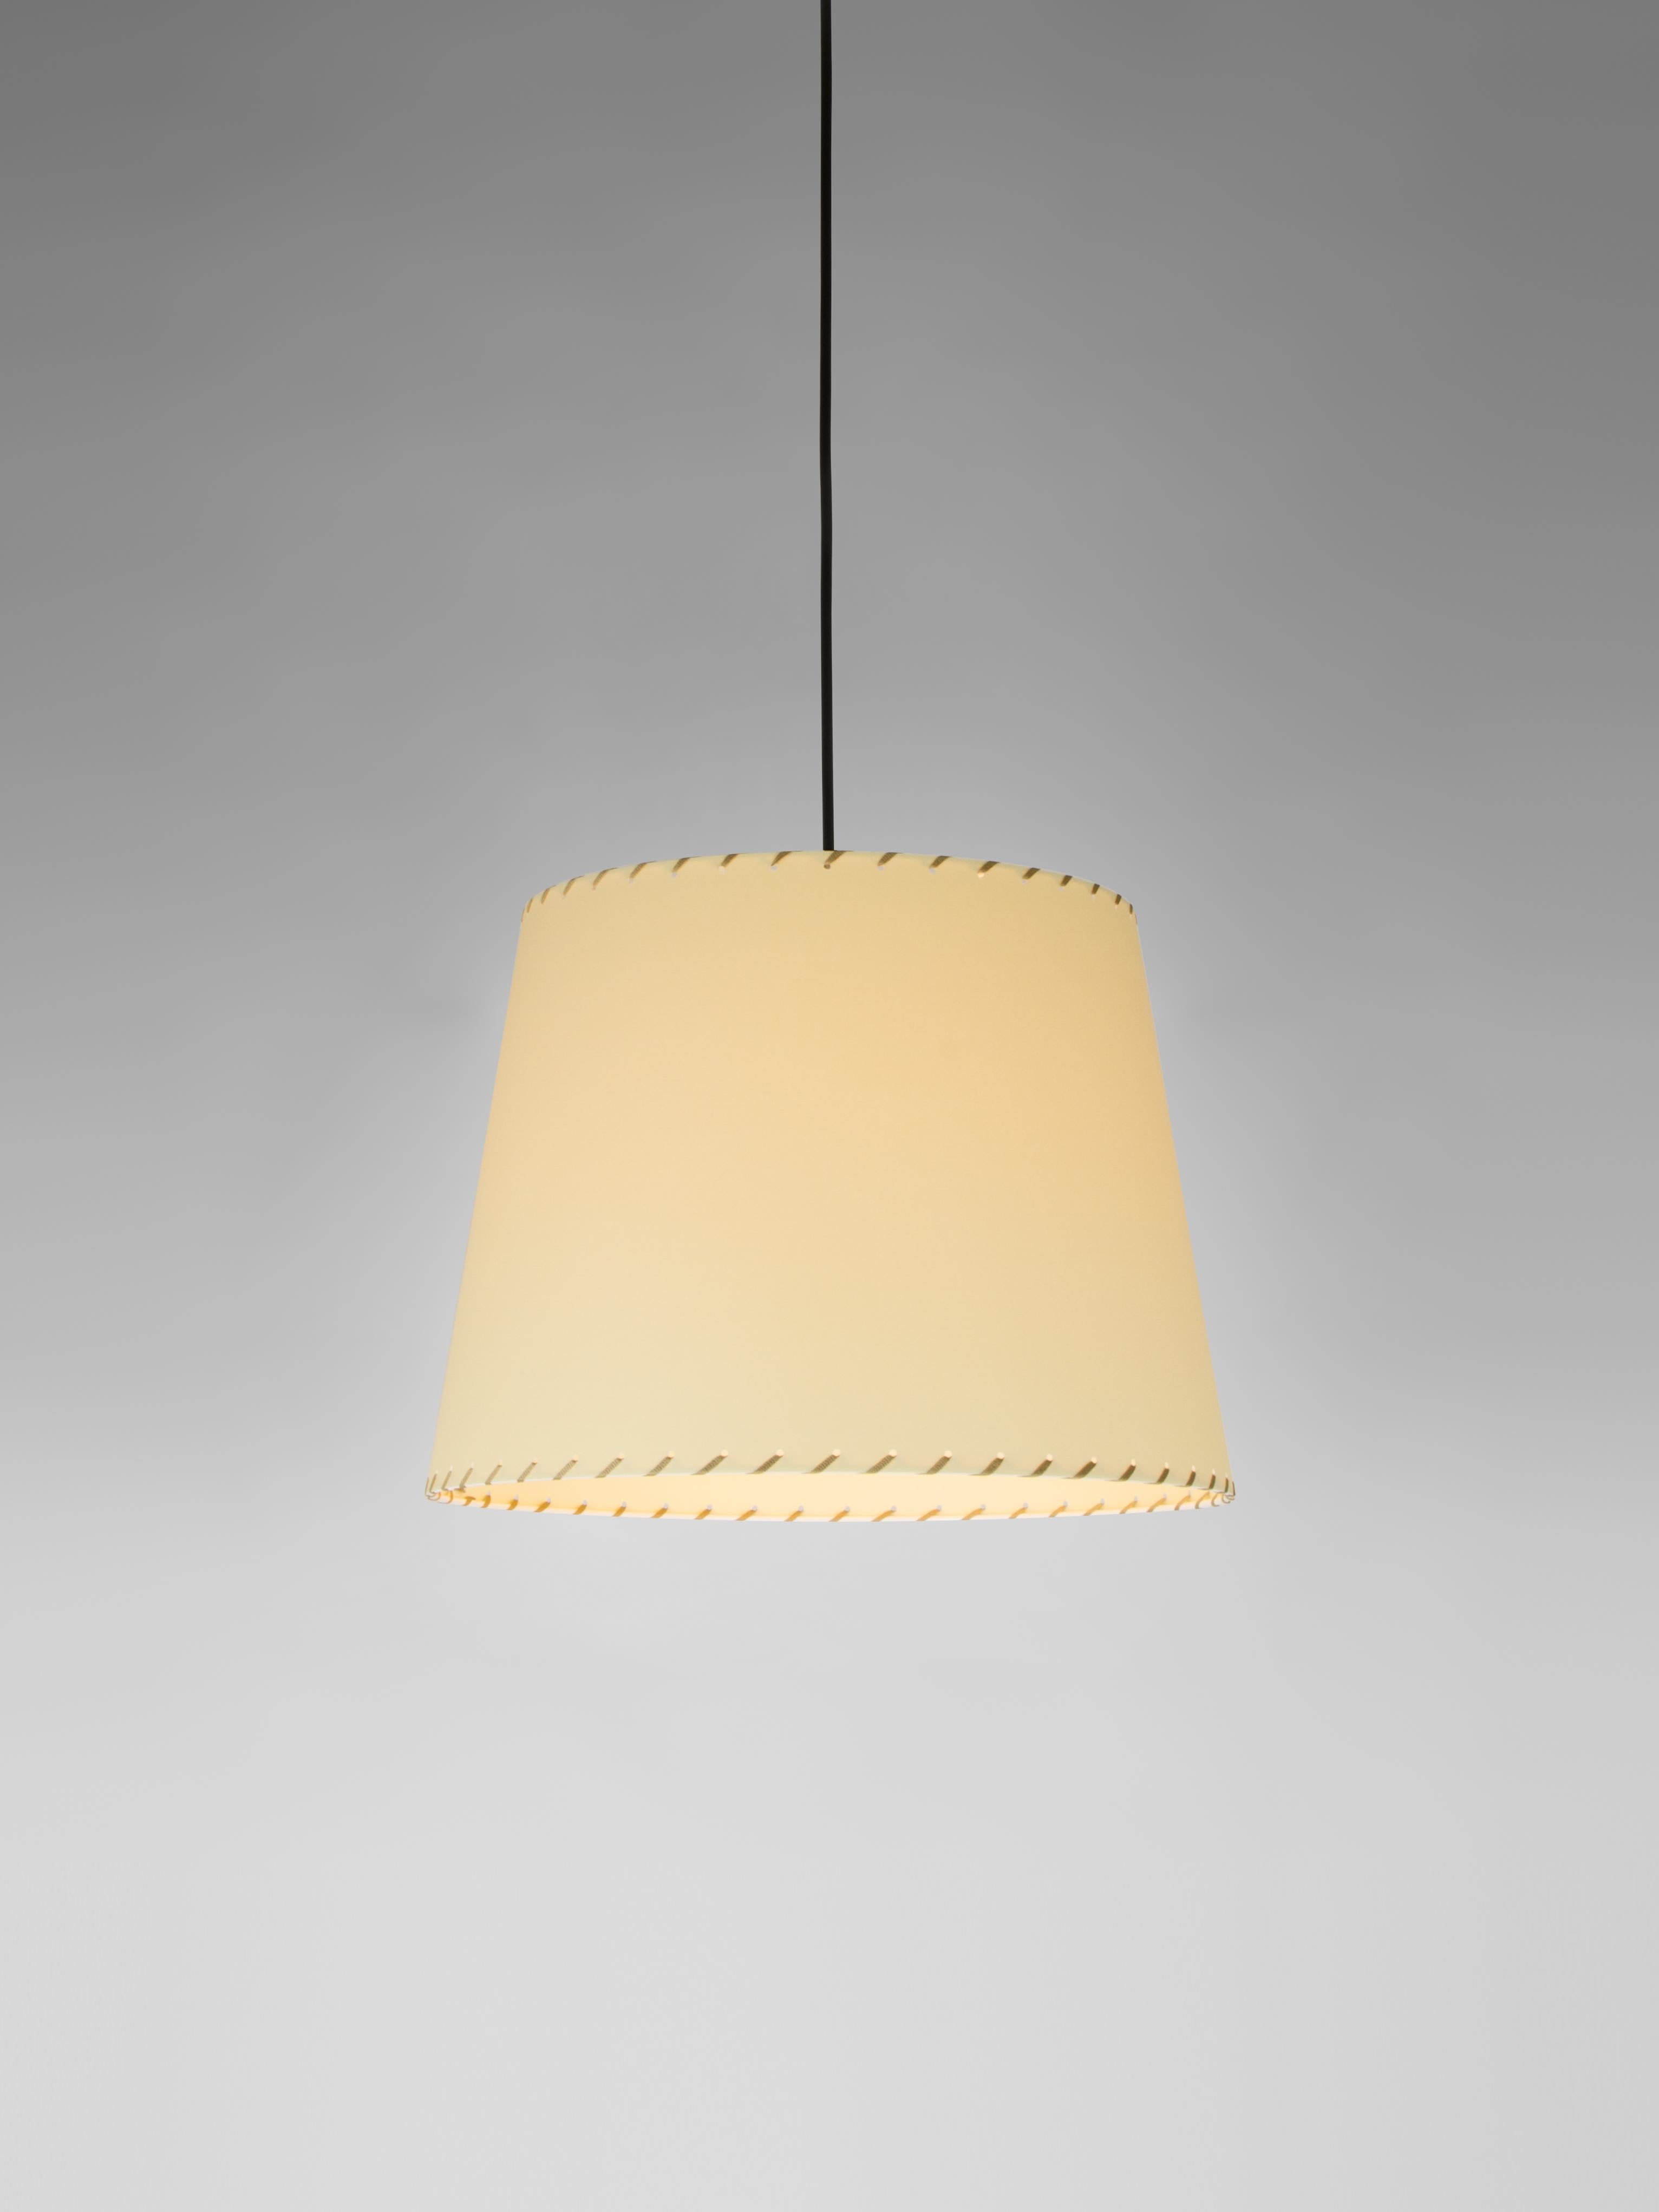 Beige Sísísí Cónicas GT3 pendant lamp by Santa & Cole
Dimensions: D 36 x H 27 cm
Materials: metal, stitched parchment.
Available in other colors.

The conical shape group has multiple finishes and sizes. It consists of four sizes: PT1, MT1, GT1